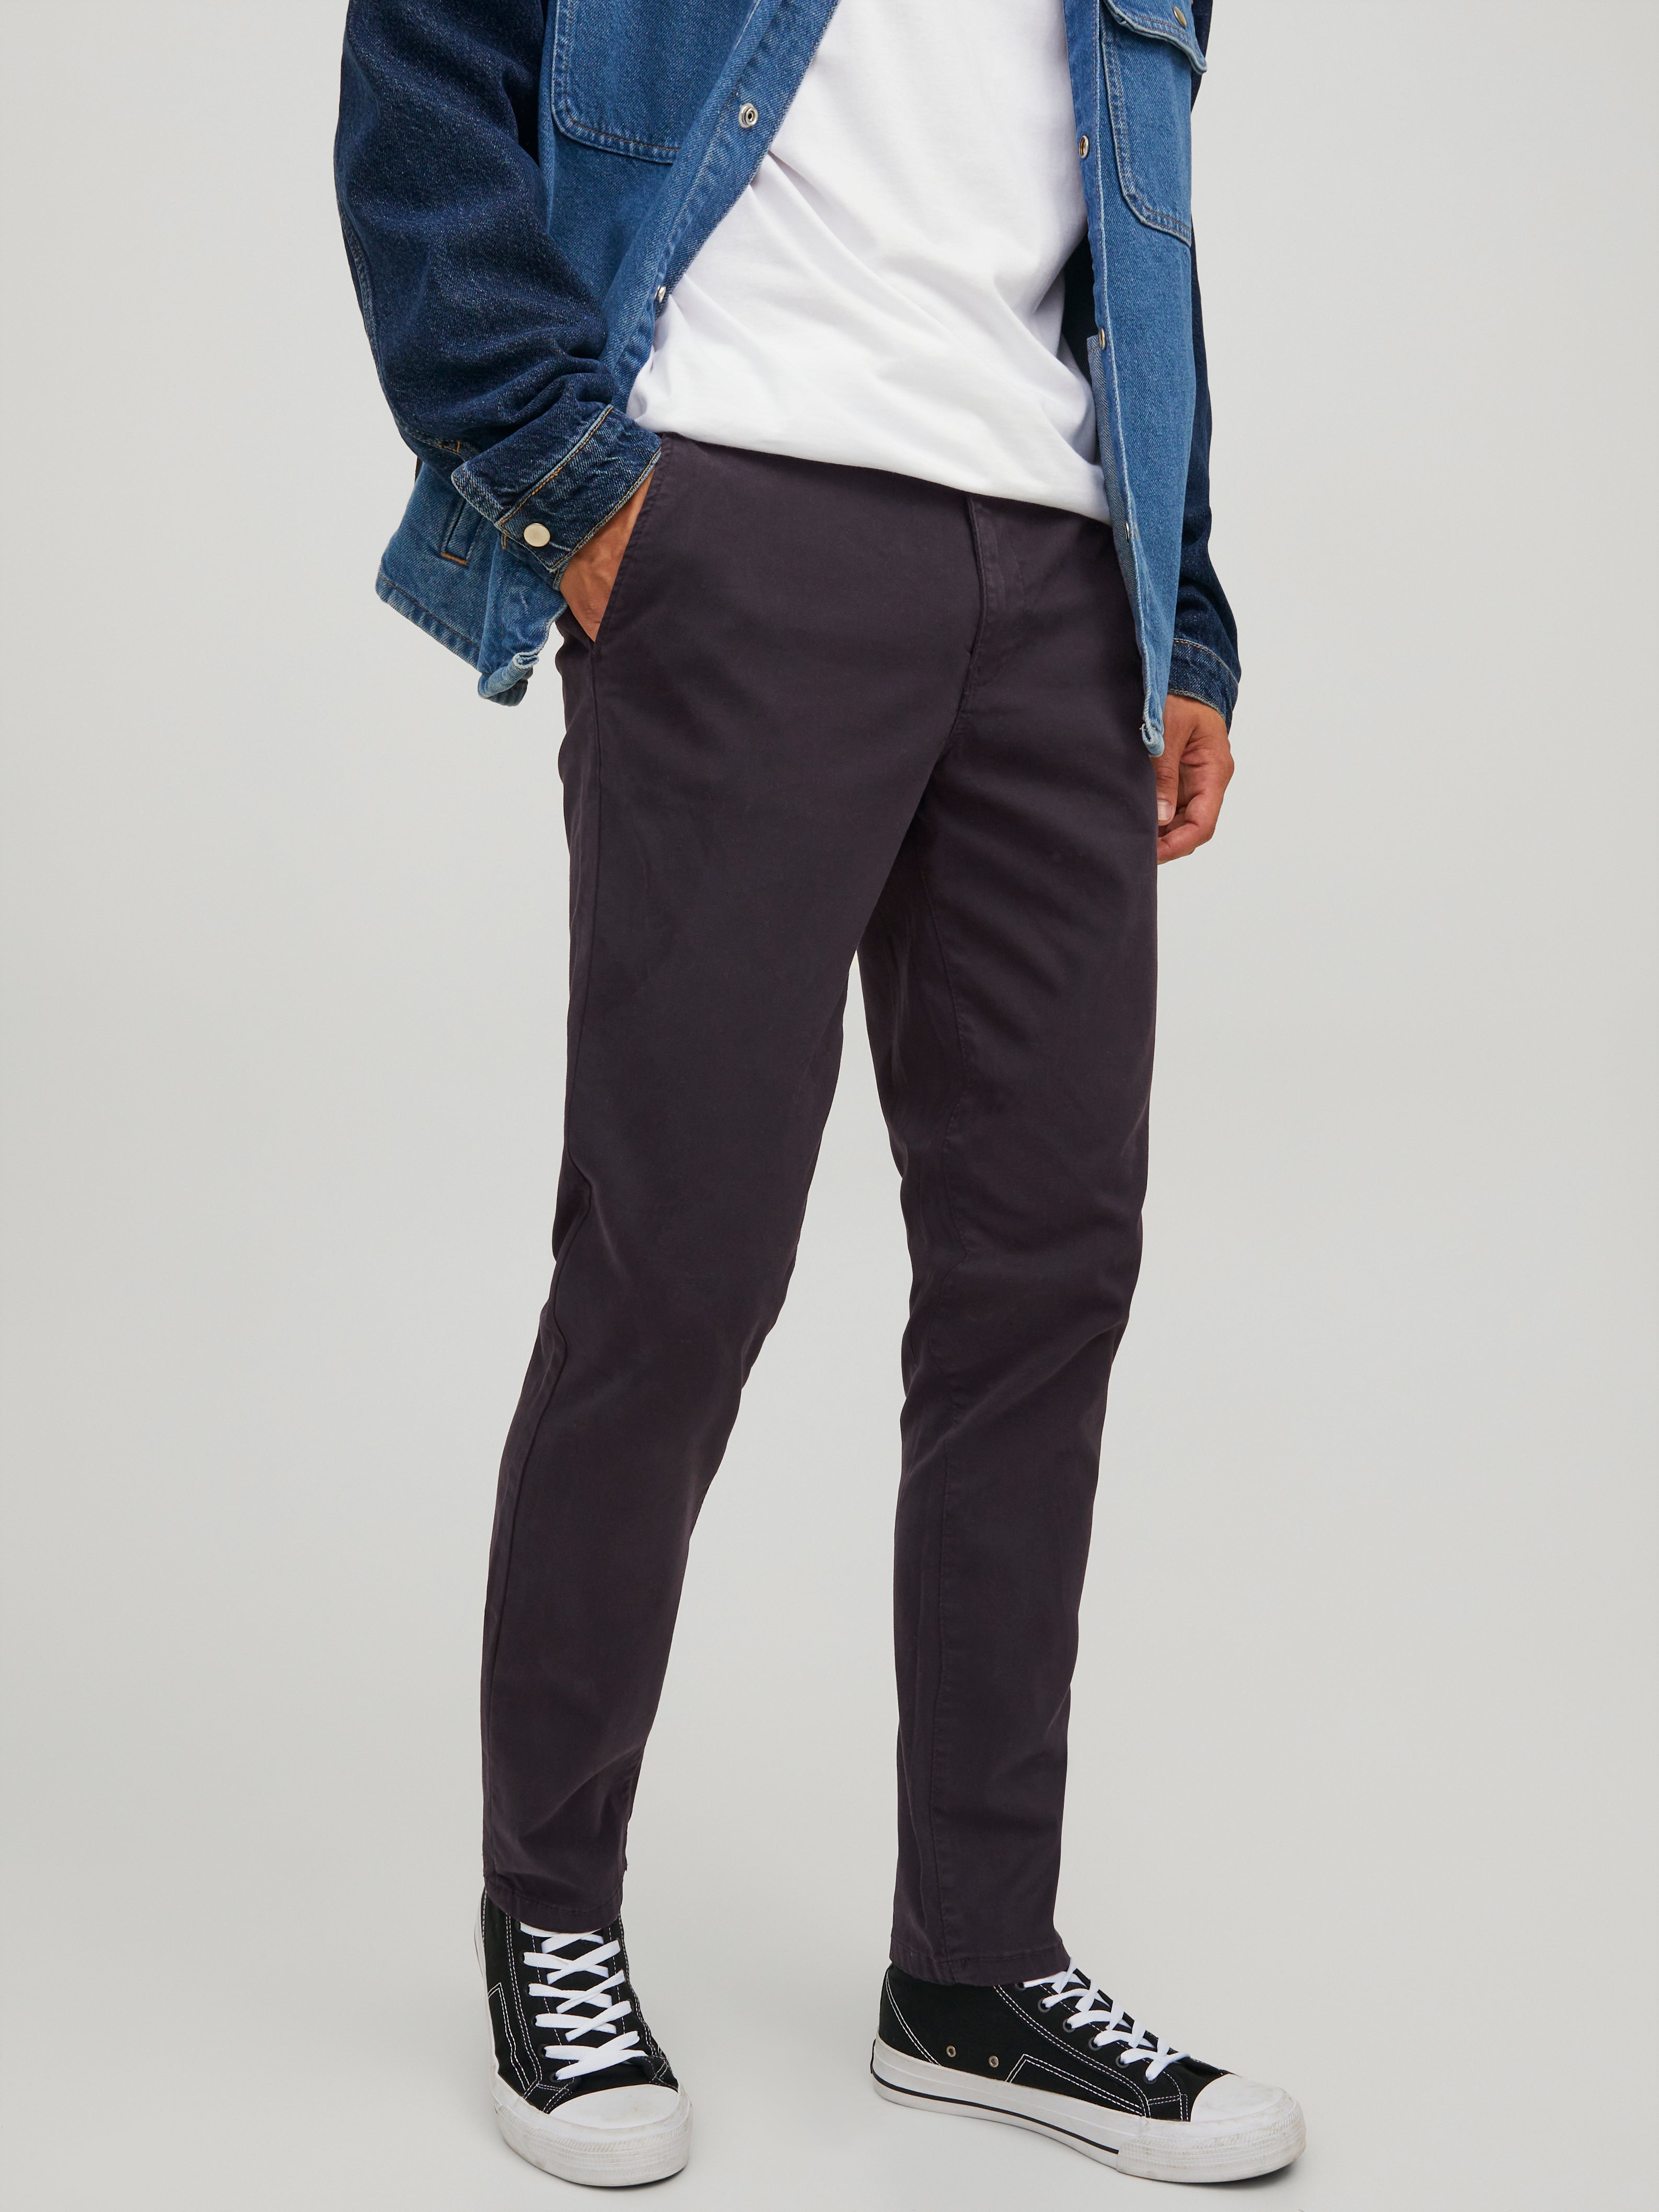 Navy Blue M discount 62% MEN FASHION Trousers Sports Jack & Jones tracksuit and joggers 